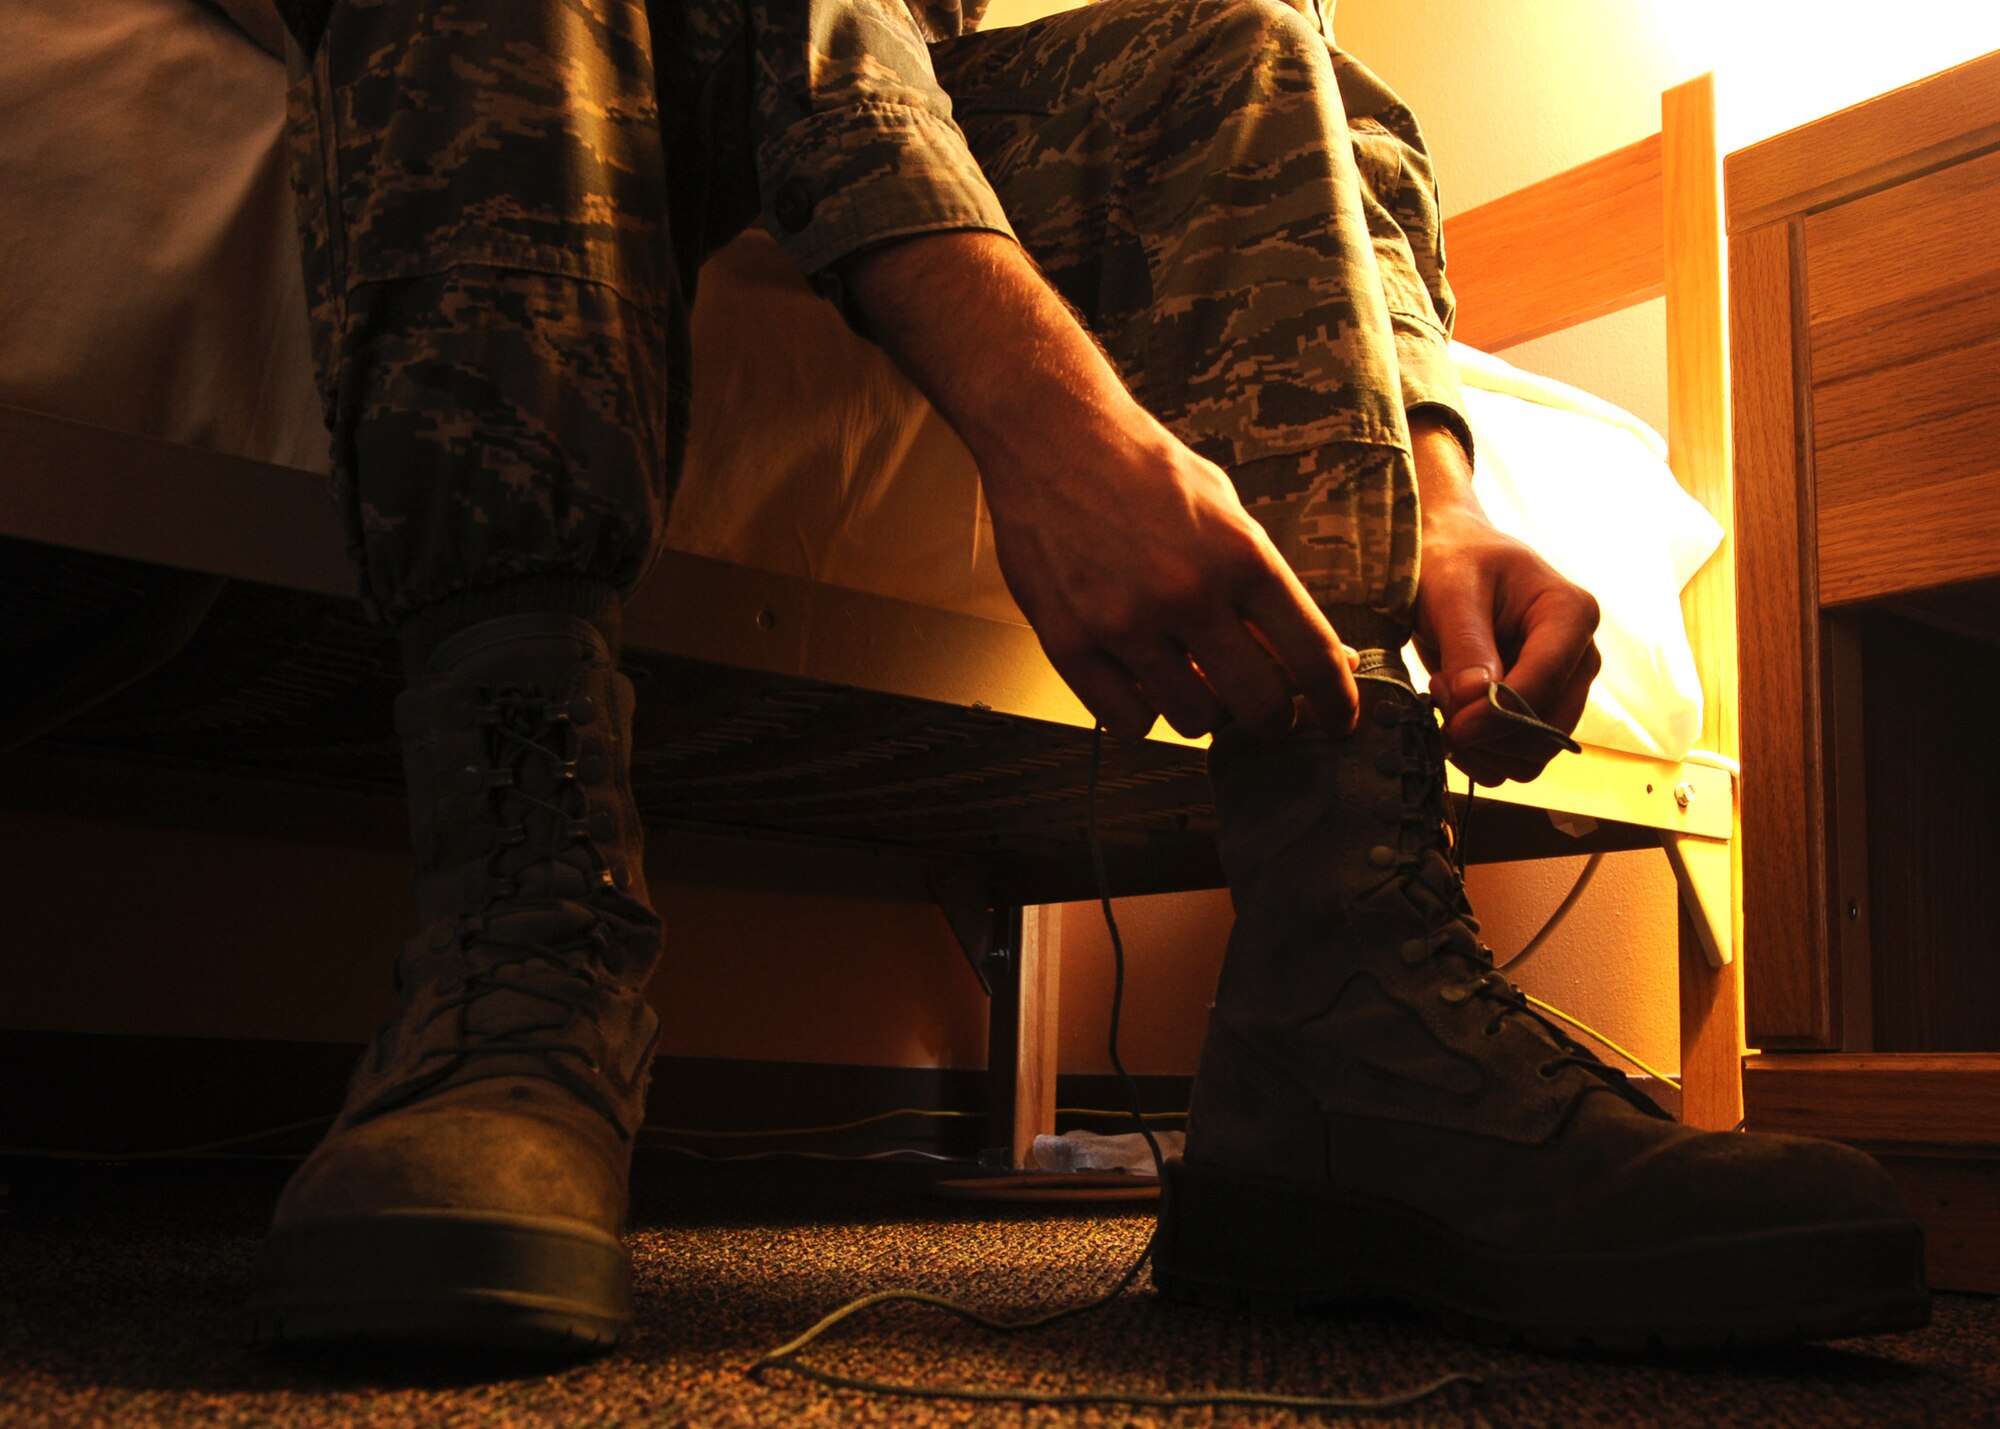 Airman 1st Class Brian Roupp, 341st Force Support Squadron missile chef, ties his combat boots at a missile alert facility at 5:30 a.m. to serve breakfast at 6 a.m. Missile chefs post to Malmstrom’s missile complex individually and are solely responsible for cooking, cleaning and maintaining MAF kitchens during their three-day tours. (U.S. Air Force photo/Senior Airman Katrina Heikkinen) 